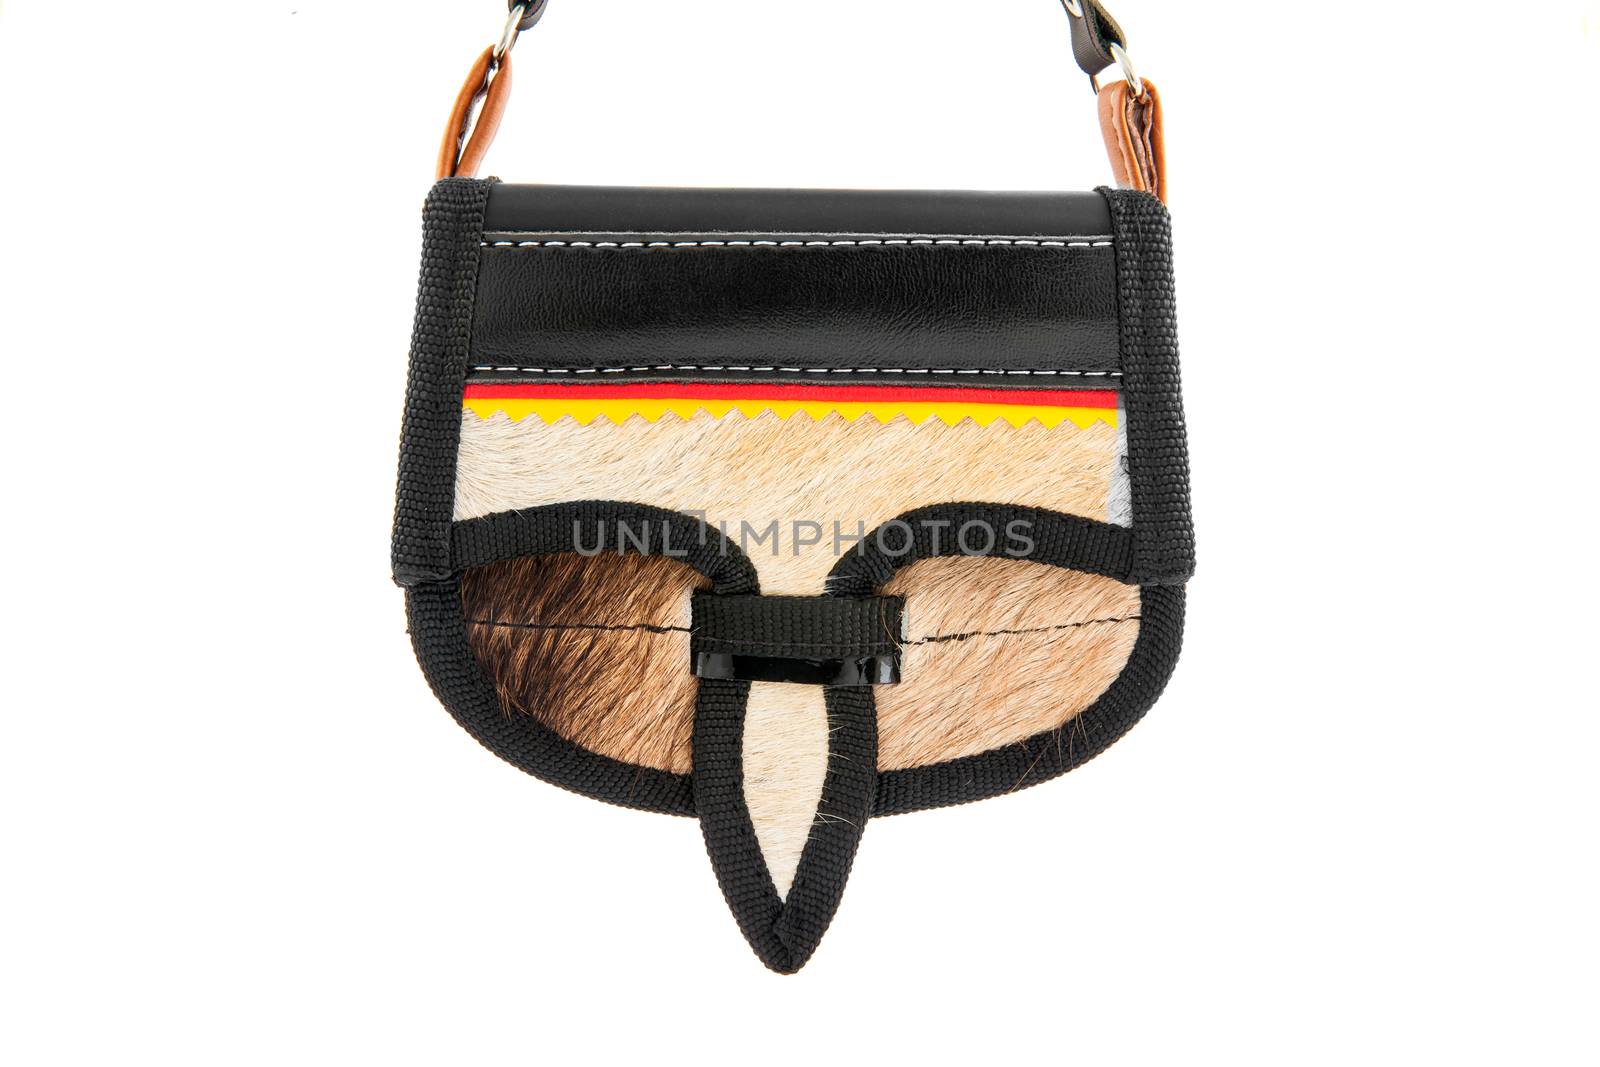 Colombian traditional leather satchel from the Antioquia Region called Carriel isolated on white background